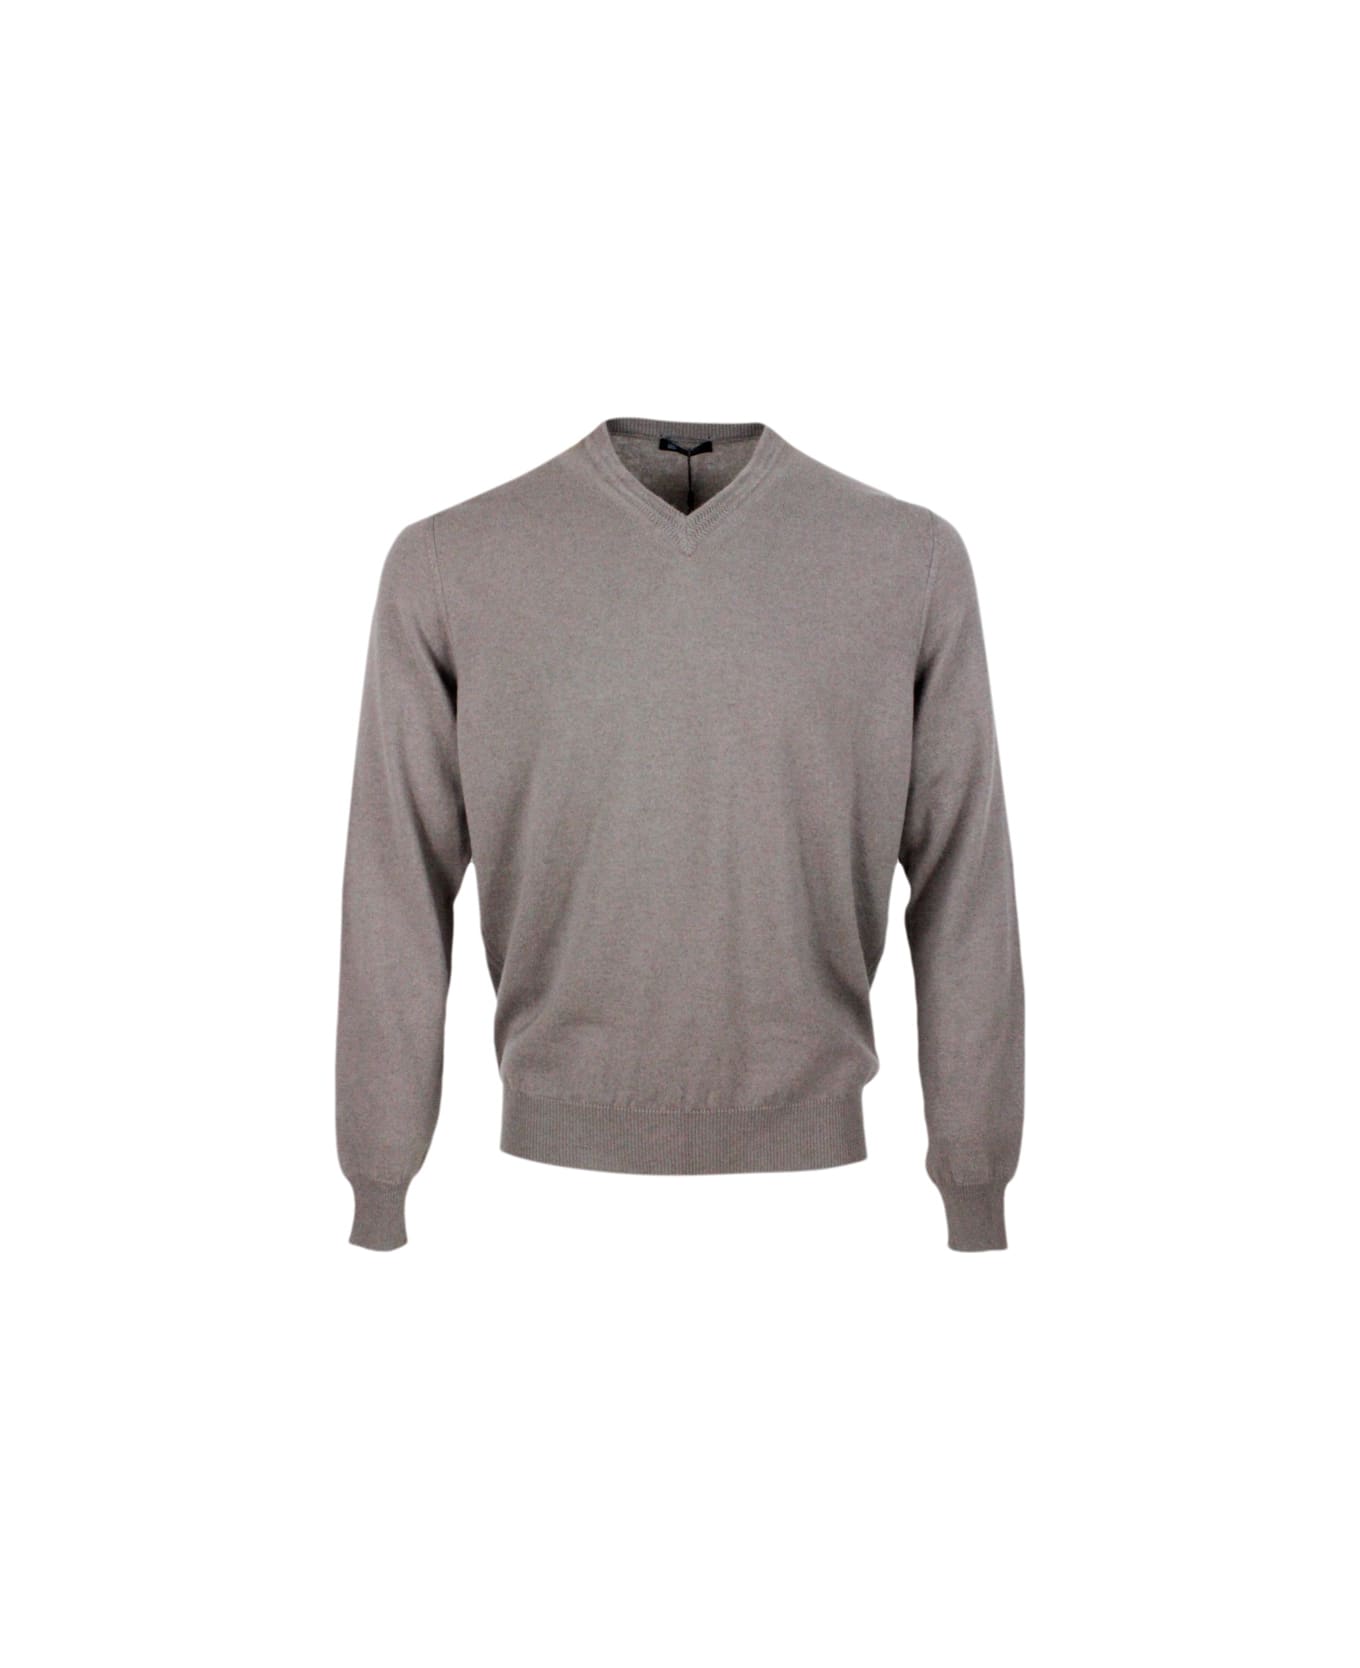 Colombo Long-sleeved V-neck Sweater In Fine 2-ply 100% Kid Cashmere With Special Processing On The Edge Of The Neck - Grey Mink ニットウェア